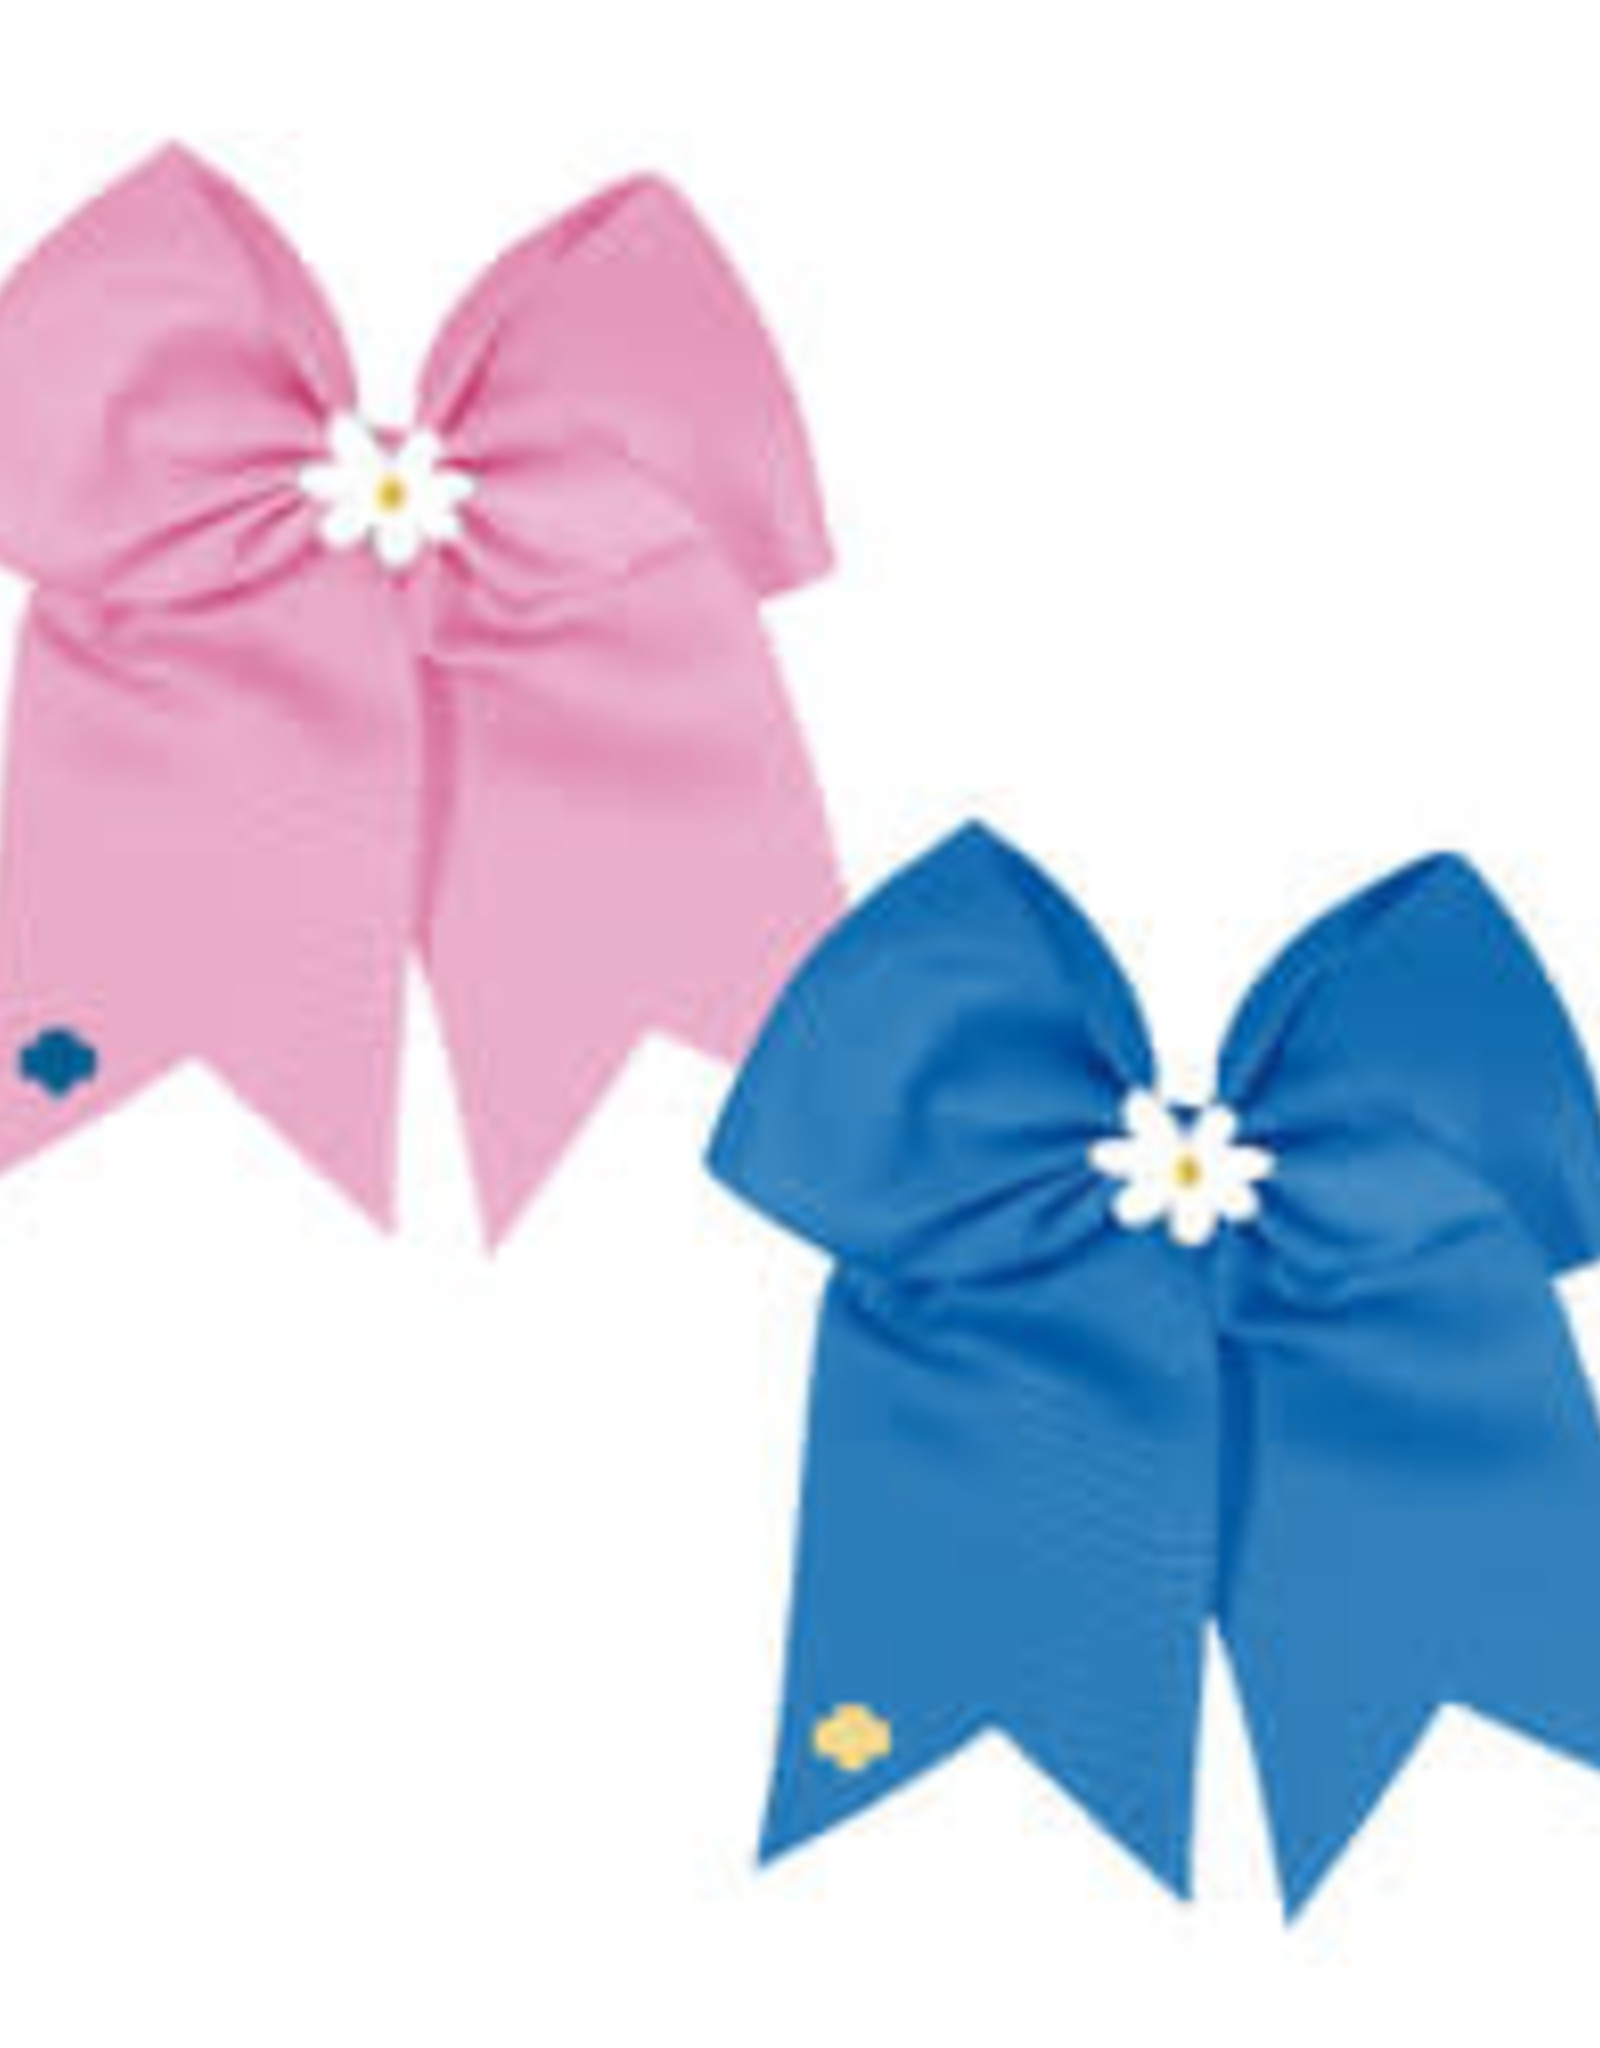 GIRL SCOUTS OF THE USA Daisy Bow Set